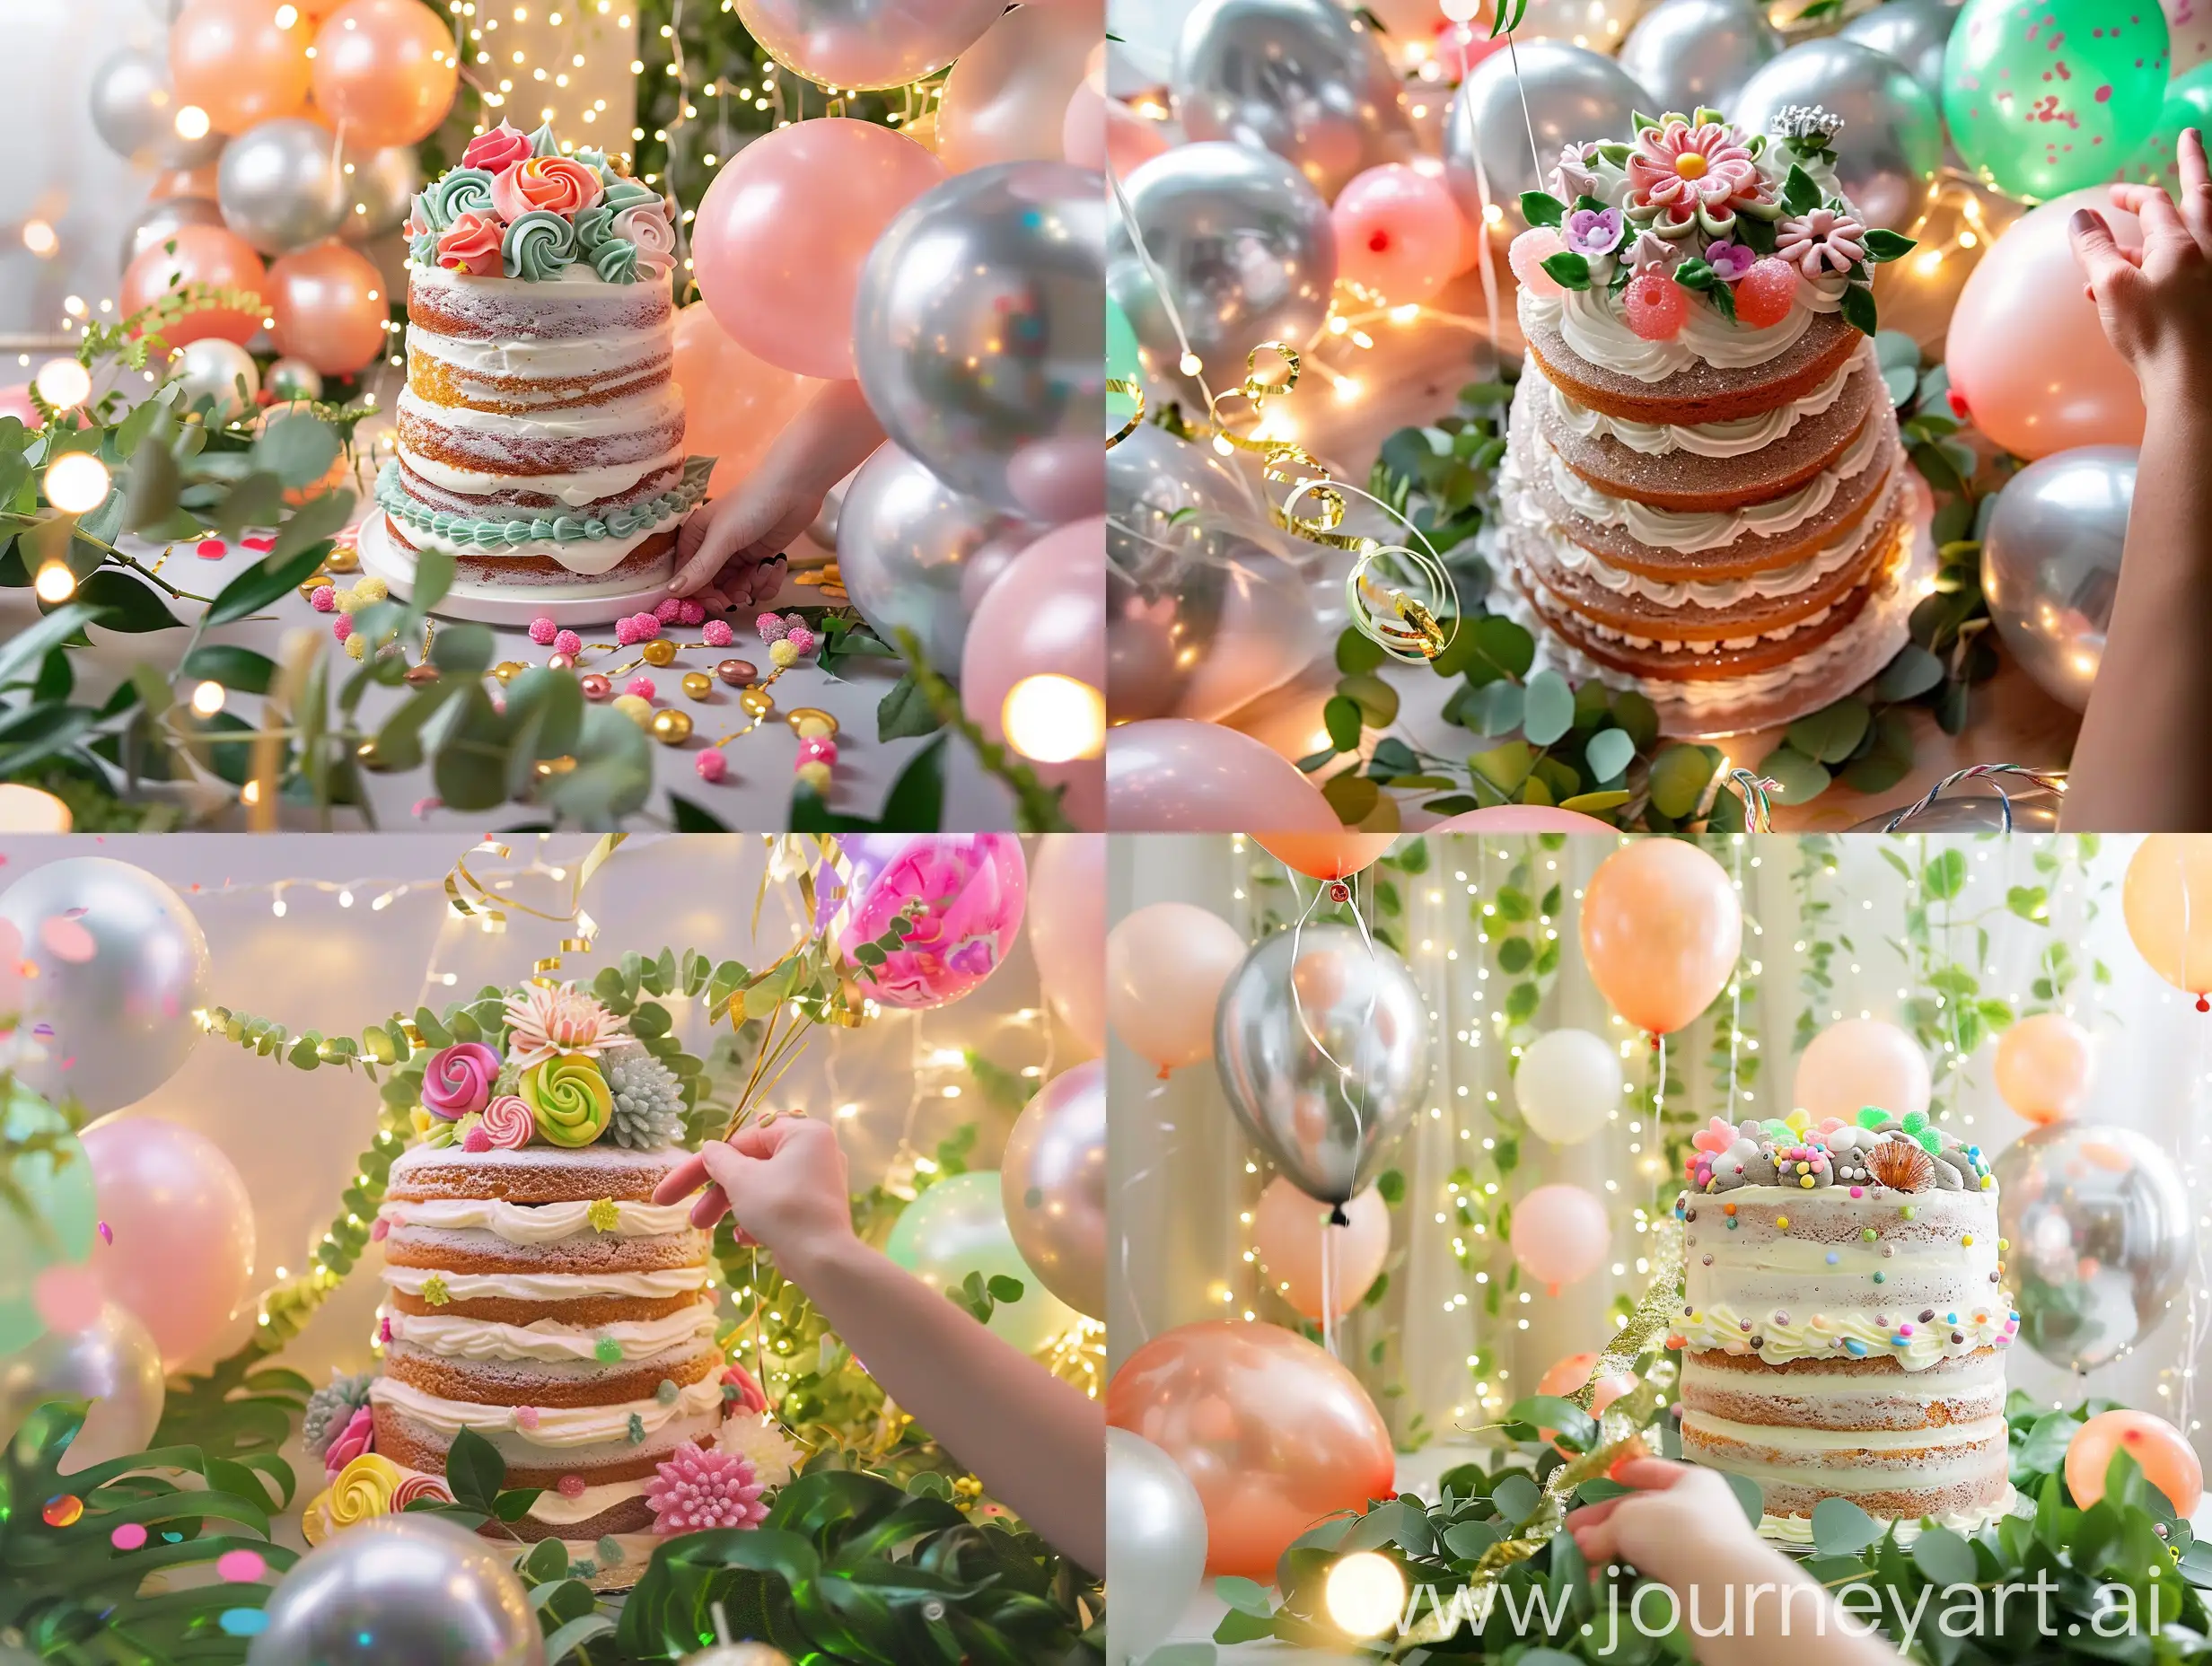 A festive scene bursts with the joy of a party. In the center, a magnificent cake takes center stage, its layers adorned with delicate frosting swirls and vibrant candy flowers. Lush greenery cascades down the sides, adding a touch of elegance. Around the cake, a vibrant array of balloons bob gently, their glossy surfaces reflecting the warm light of fairy lights strung across the room. The balloons come in a mix of metallic silver, pastel pink, and confetti-filled, each one adding to the celebratory atmosphere. A hand reaches in to grab a shimmering gold streamer, hinting at the playful energy about to unfold. The overall scene exudes a sense of excitement and anticipation, promising a party filled with laughter, delicious treats, and unforgettable memories.